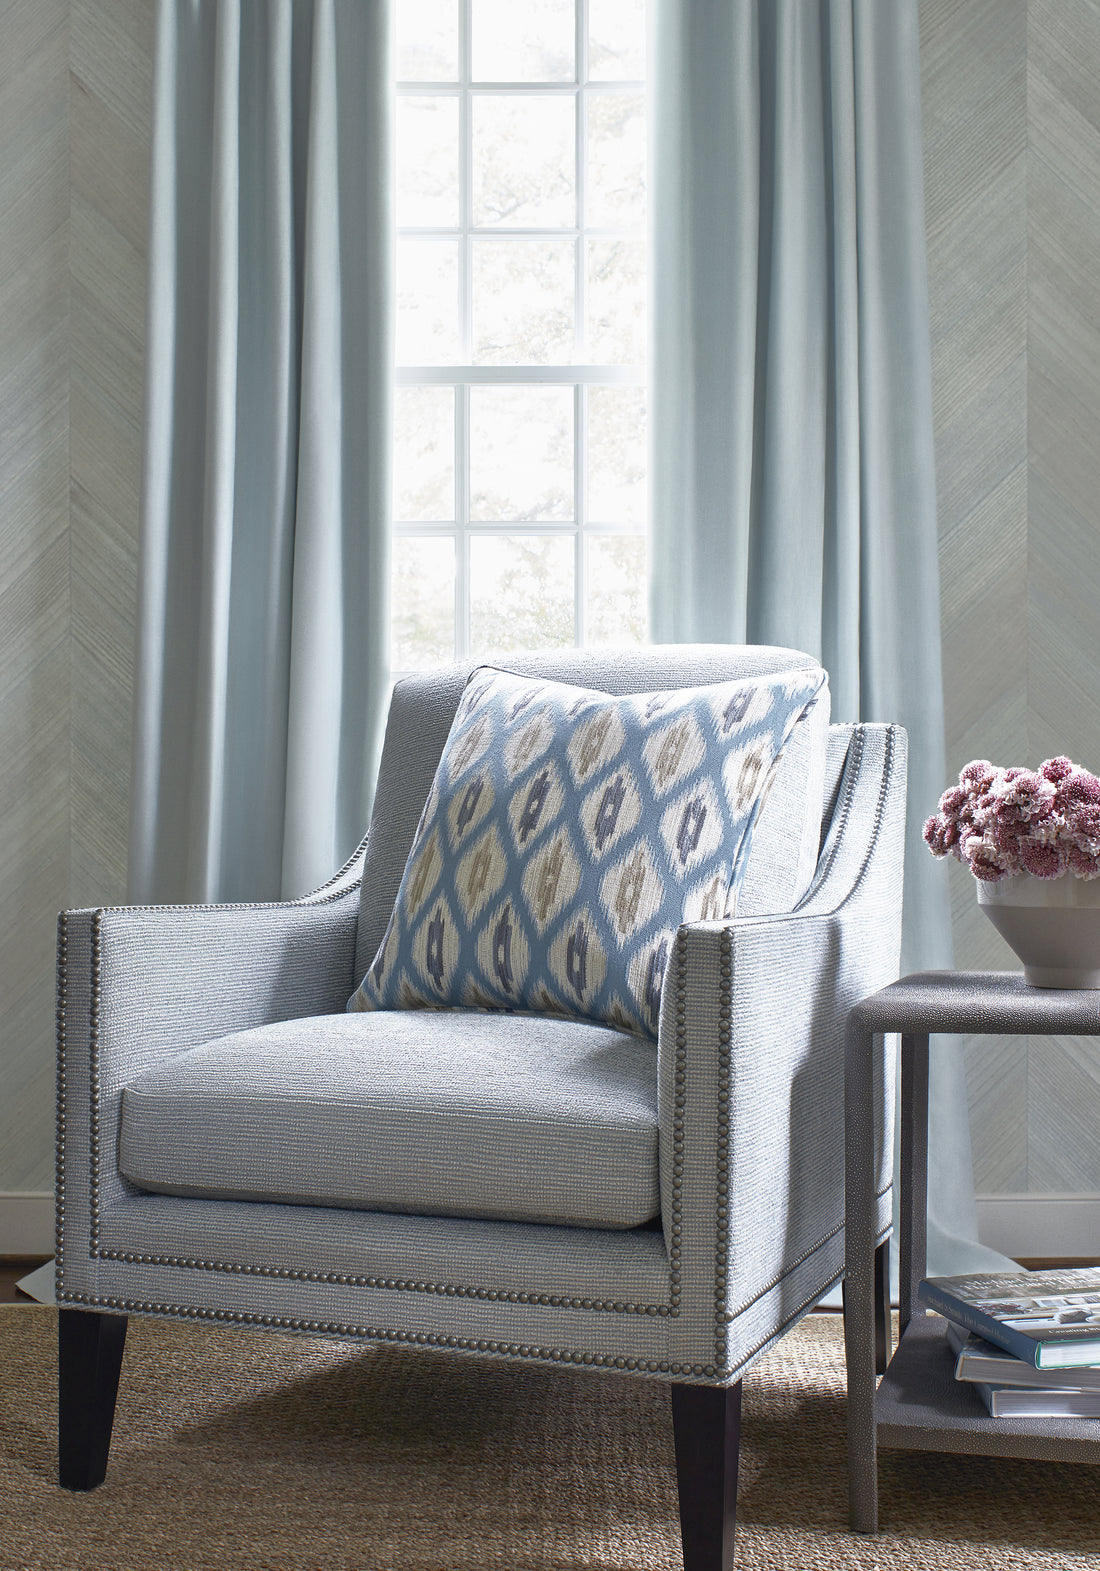 Westwood Chair in Milo woven fabric in seamist color - pattern number W73314 by Thibaut in the Nomad collection